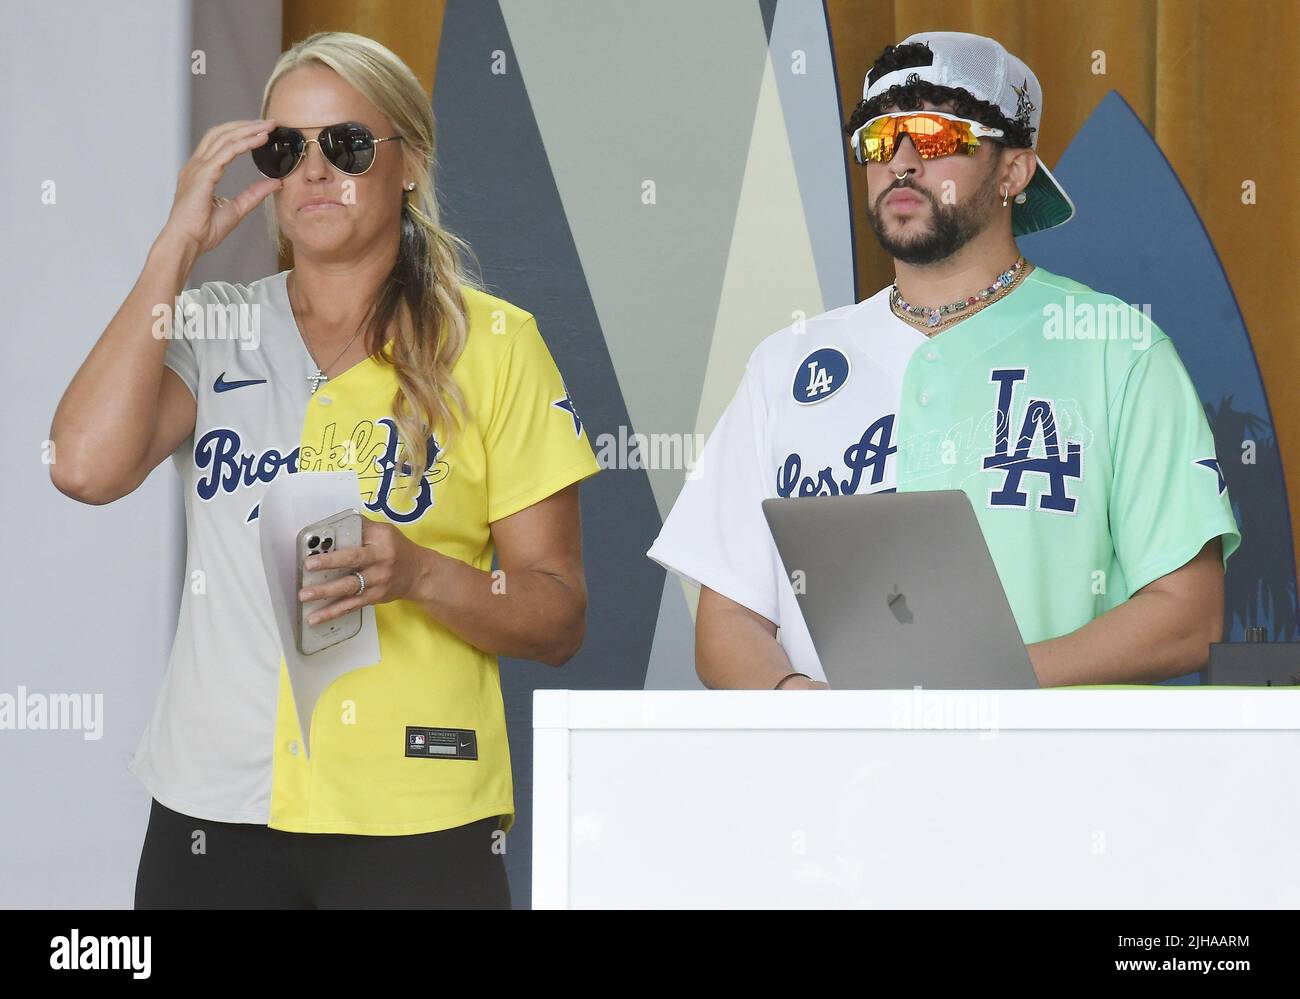 Los Angeles, USA. 16th July, 2022. Bad Bunny at the 2022 MLB All-Star  Celebrity Softball Game Media Availability held at the 76 Station - Dodger  Stadium Parking Lot in Los Angeles, CA